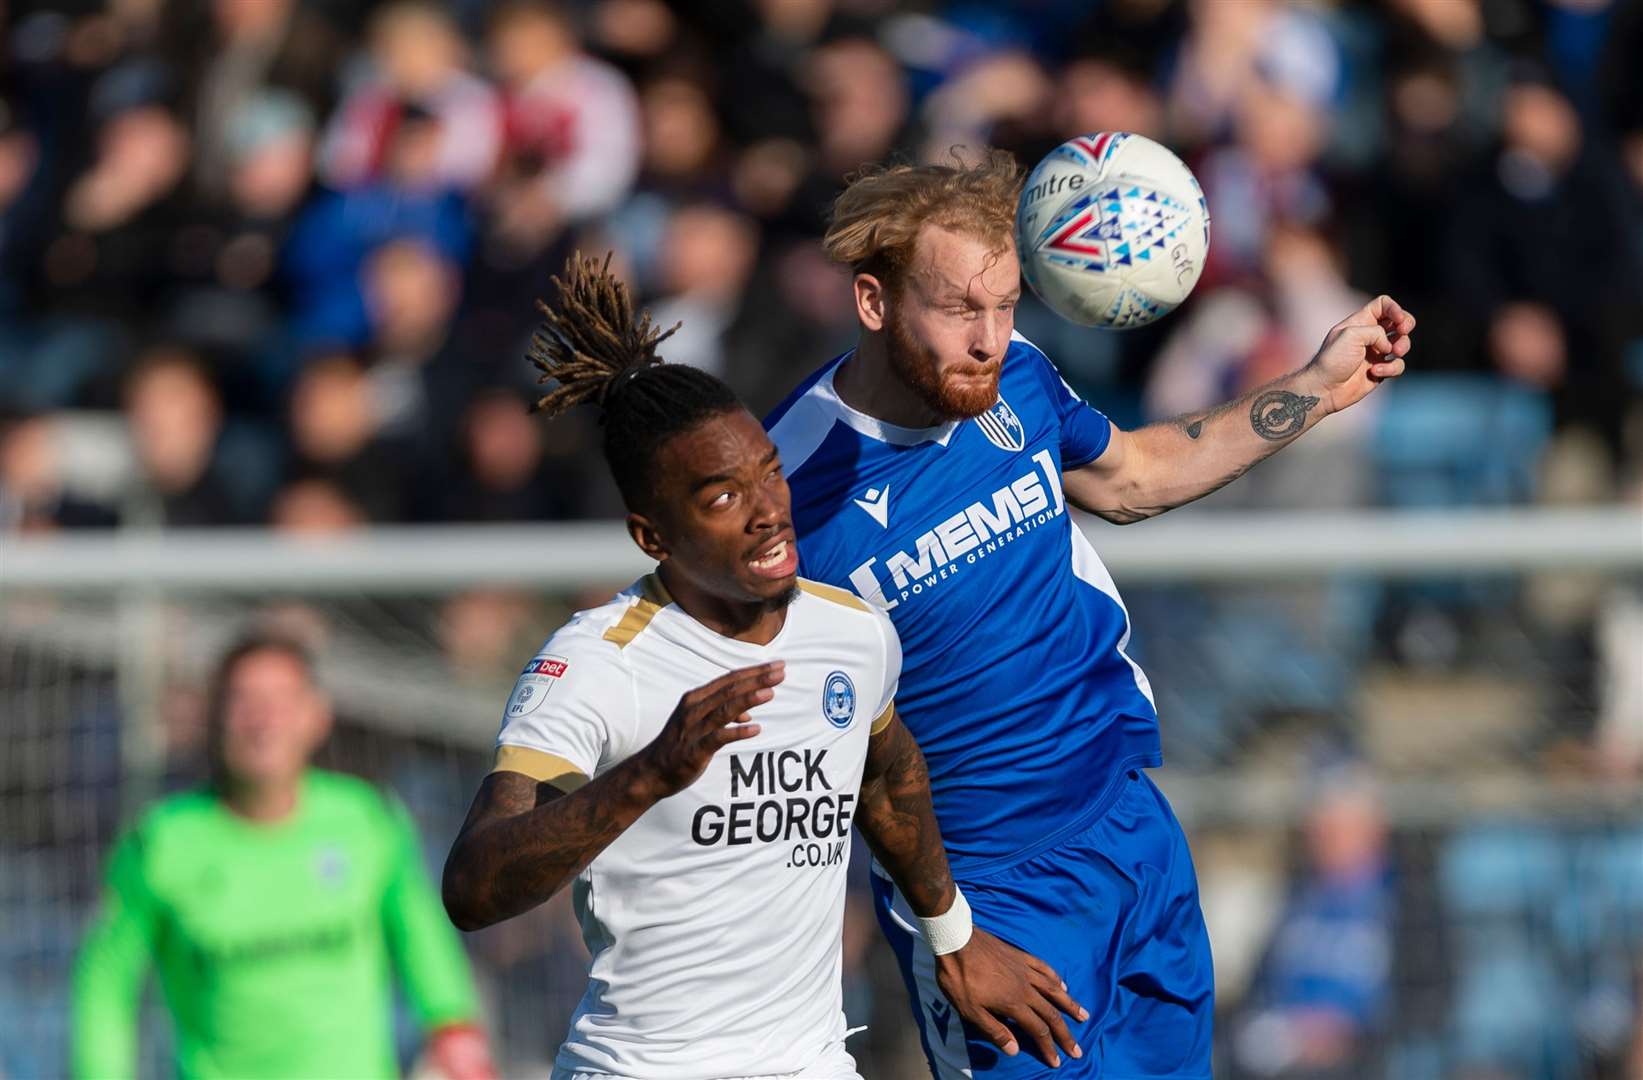 League 1's star man Ivan Toney losing out to Gillingham's star man Connor Ogilvie